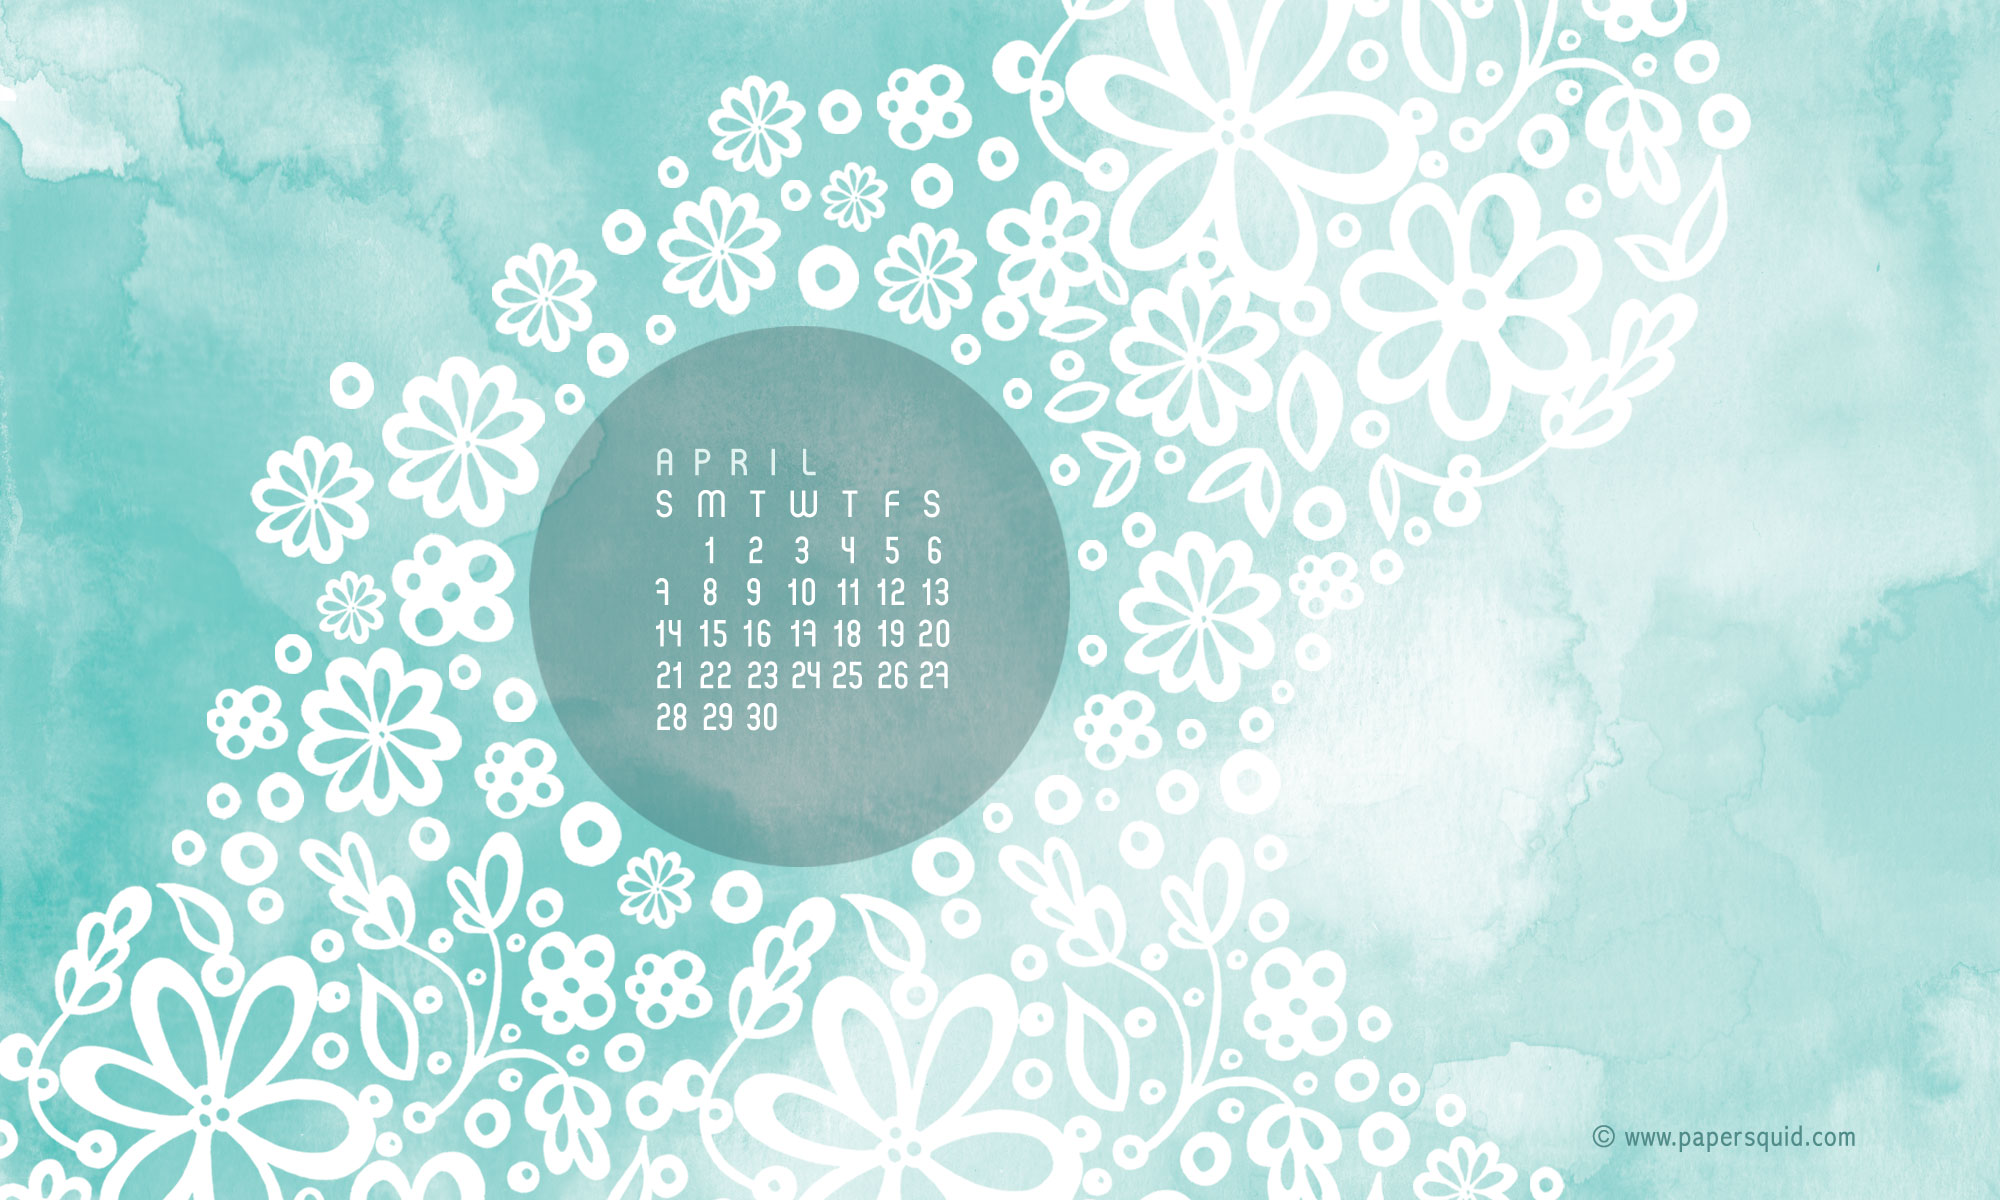  Here is Aprils desktop calendar which you can download here 2000x1200